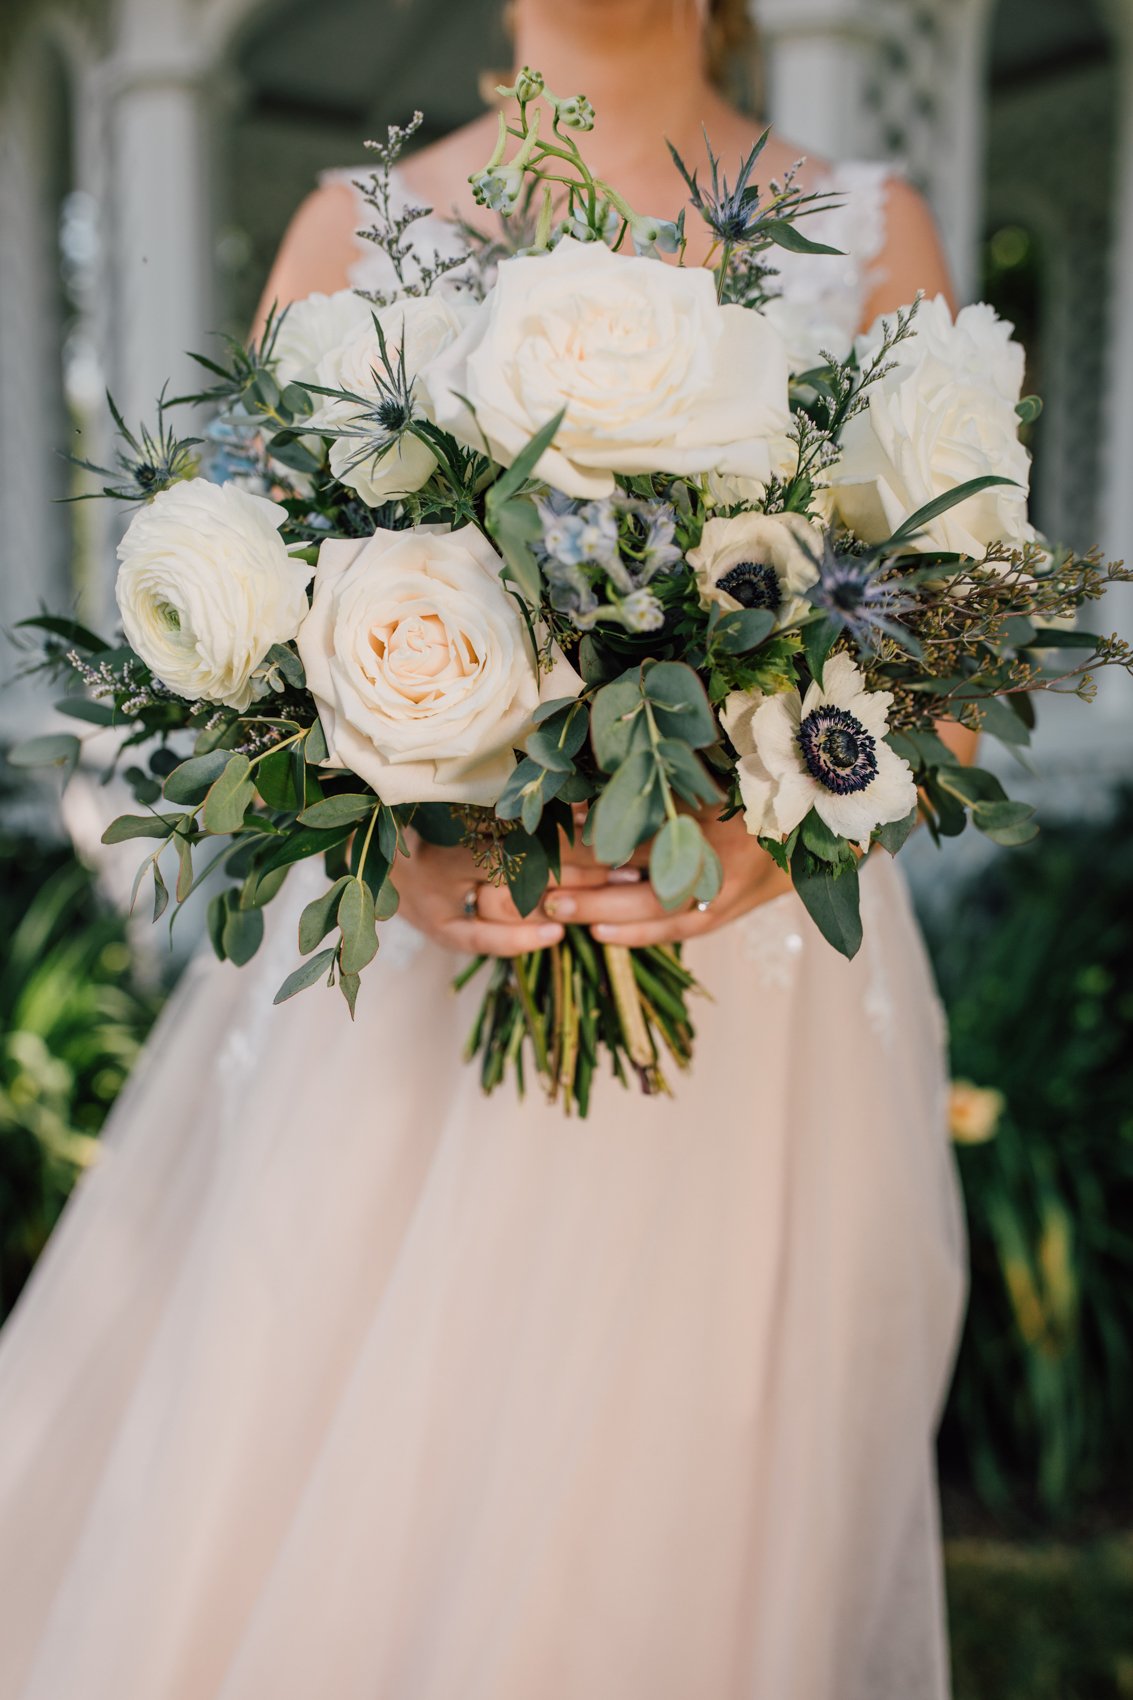  Close up of the bridal bouquet with white roses, garden roses, and lots of greenery 